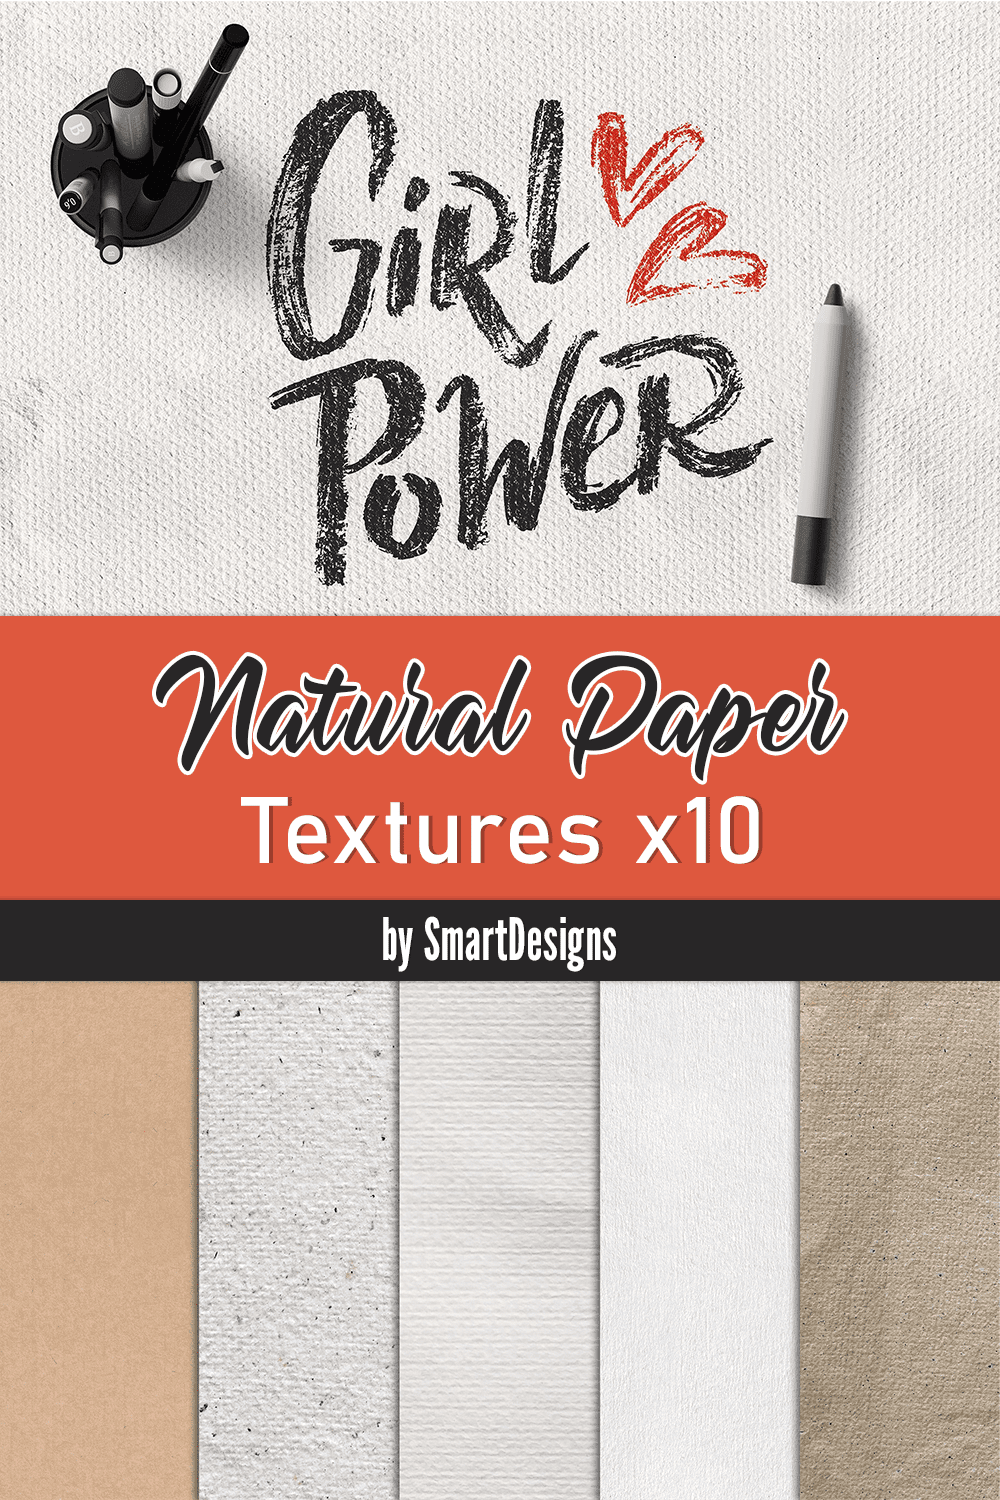 Natural paper textures of pinterest.